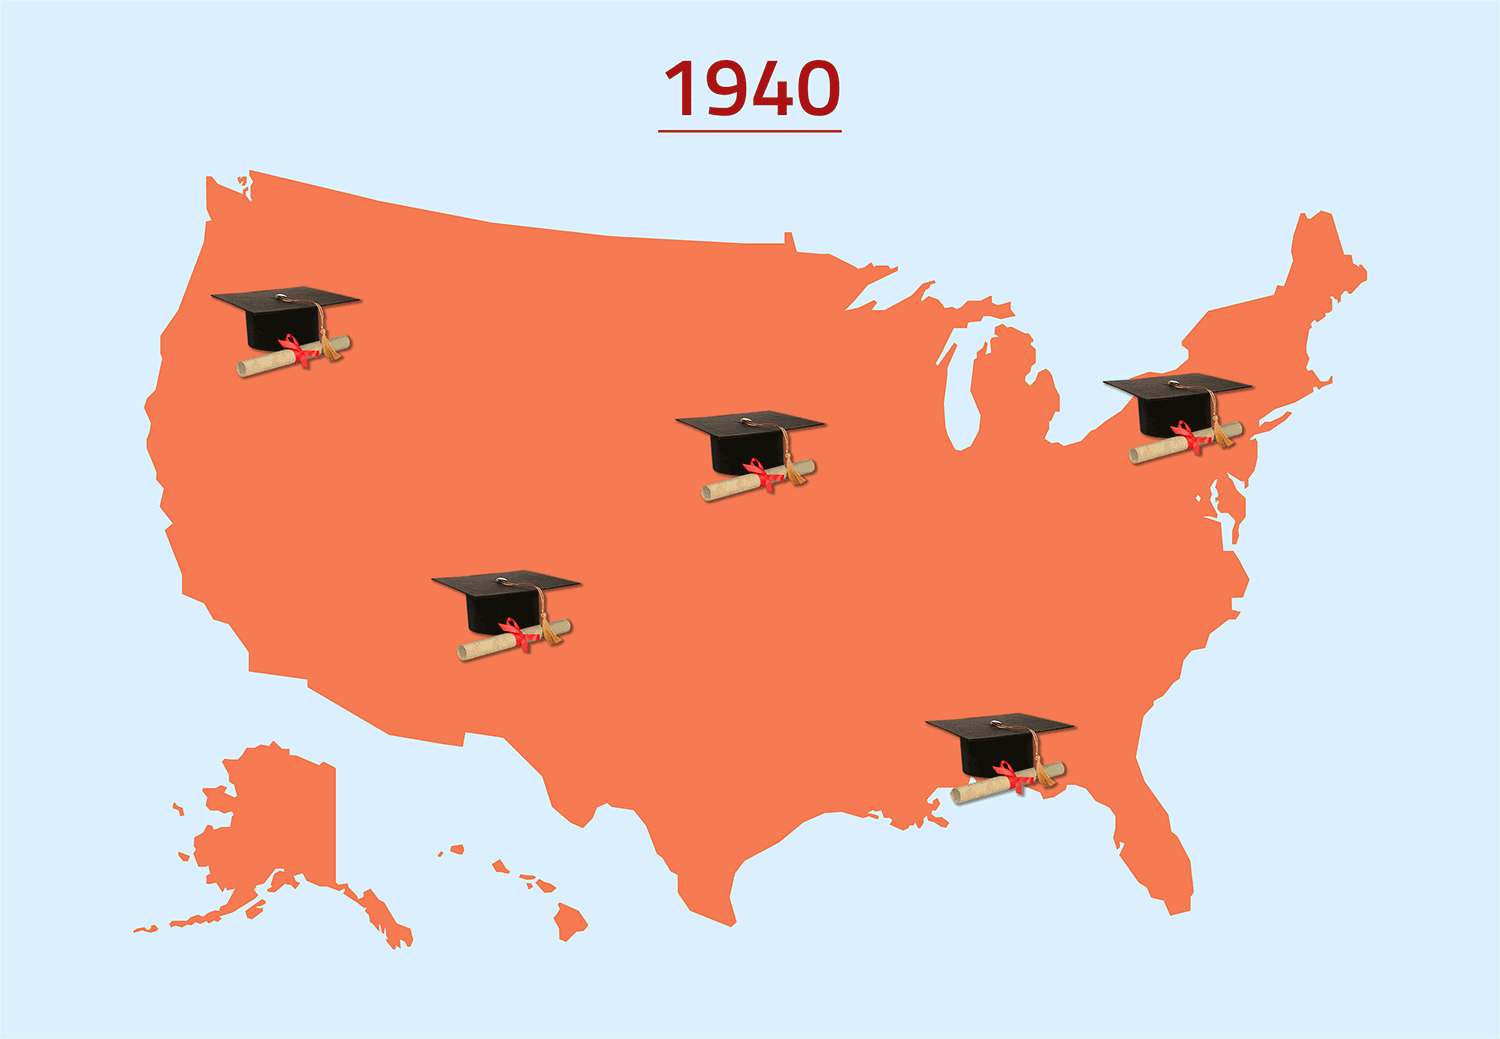 Map of the U.S. showing a few caps and diplomas to represent few college graduates in 1940 changes to a map with many caps and diplomas to represent 2021.